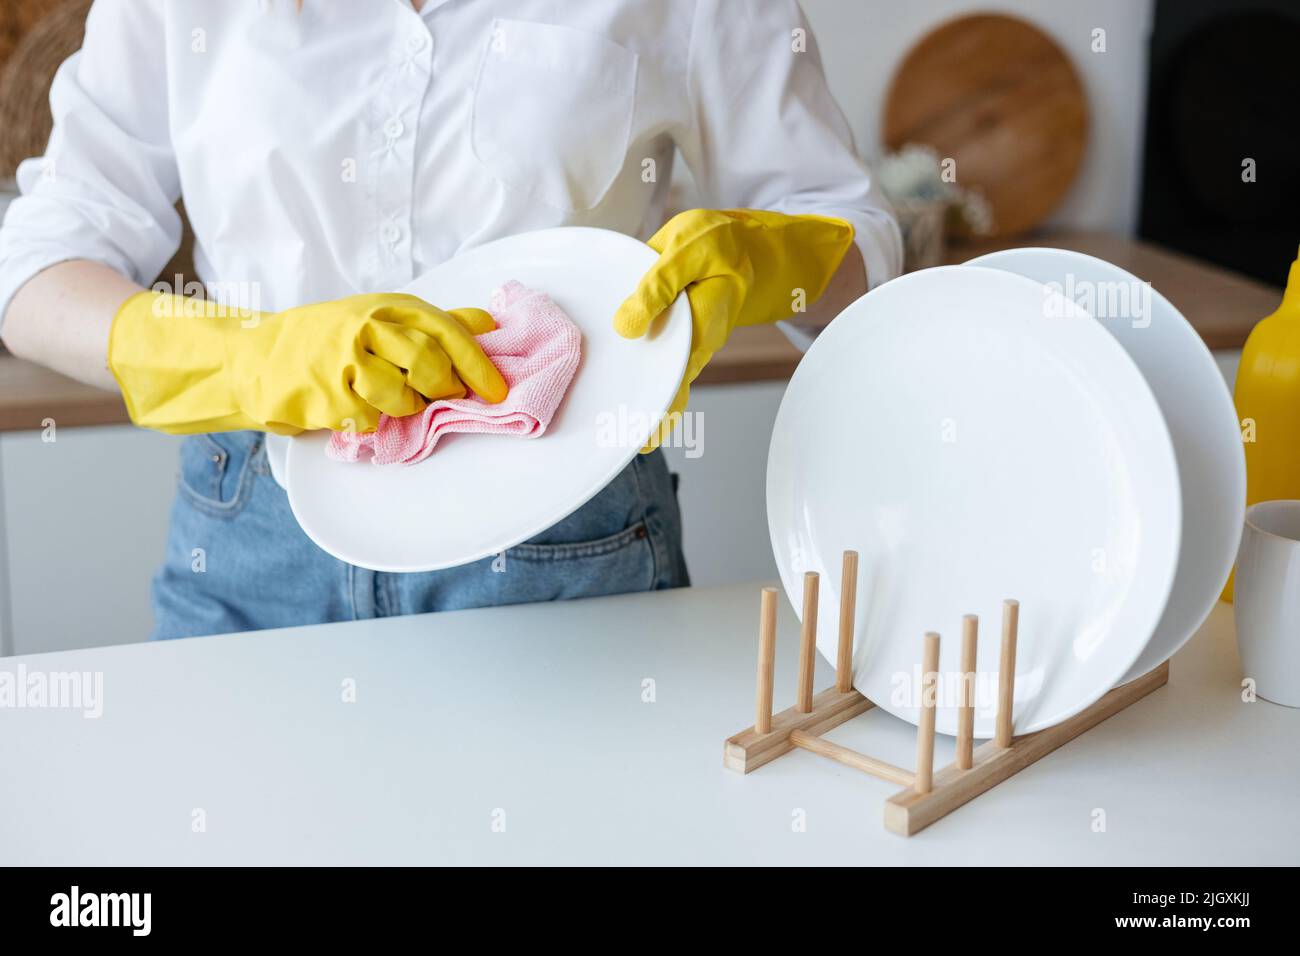 Girl wipes a clean plate with a yellow rag in the kitchen Stock Photo